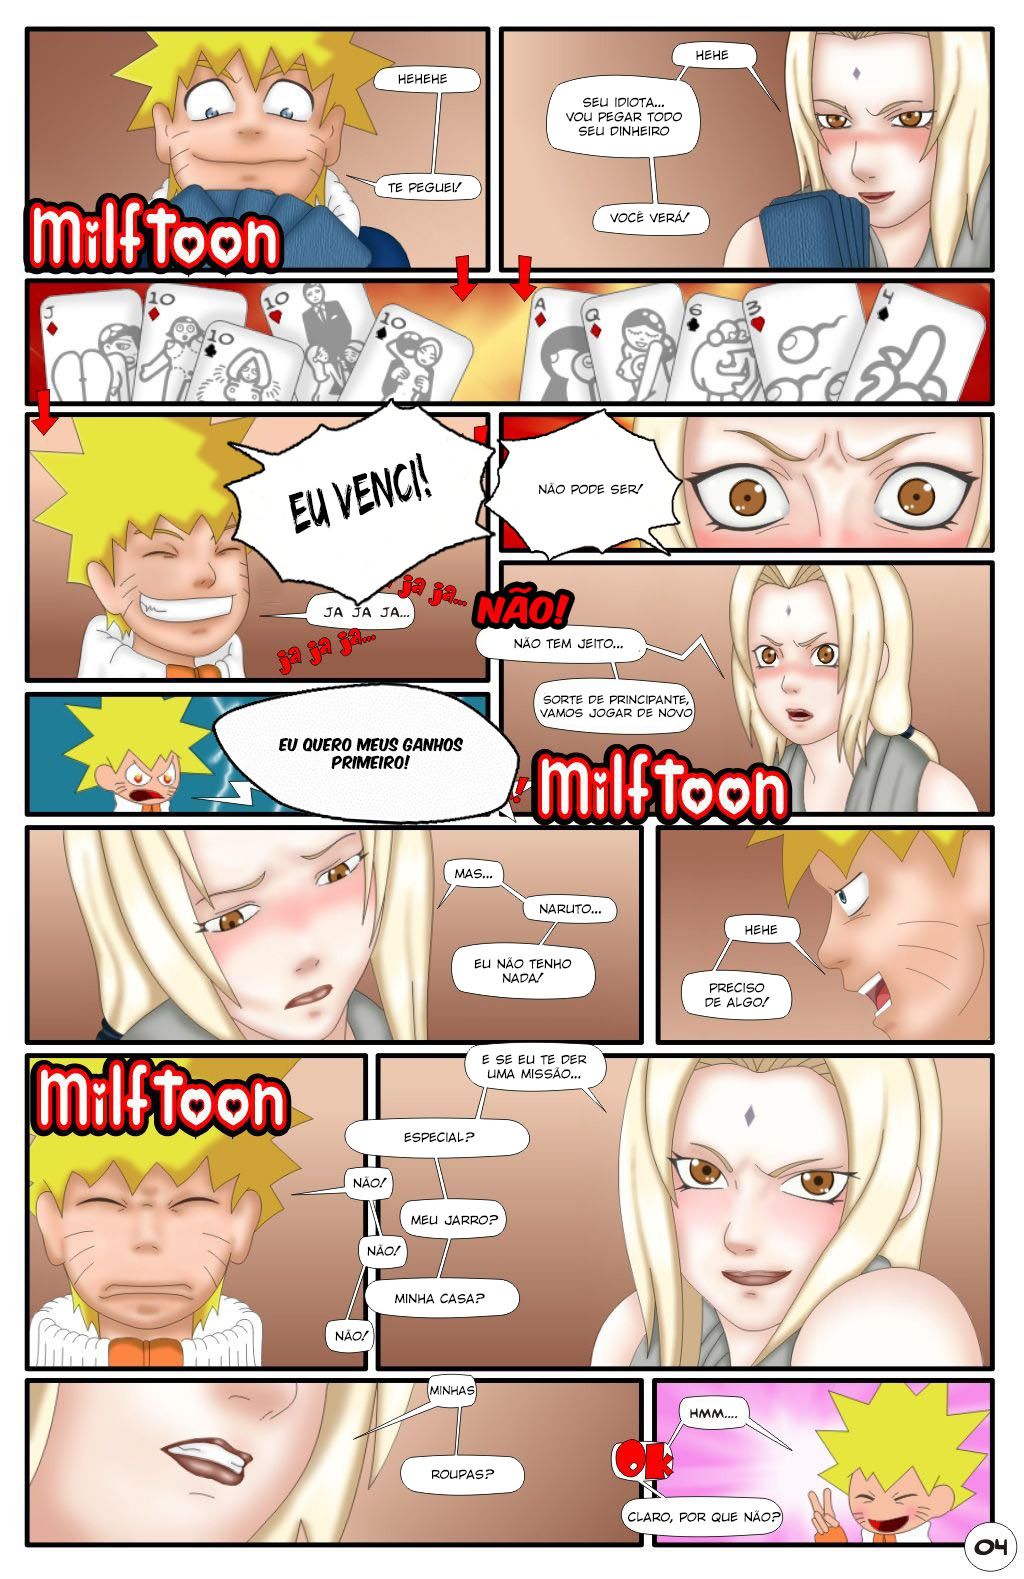 Naruto by Milftoon Hentai pt-br 04